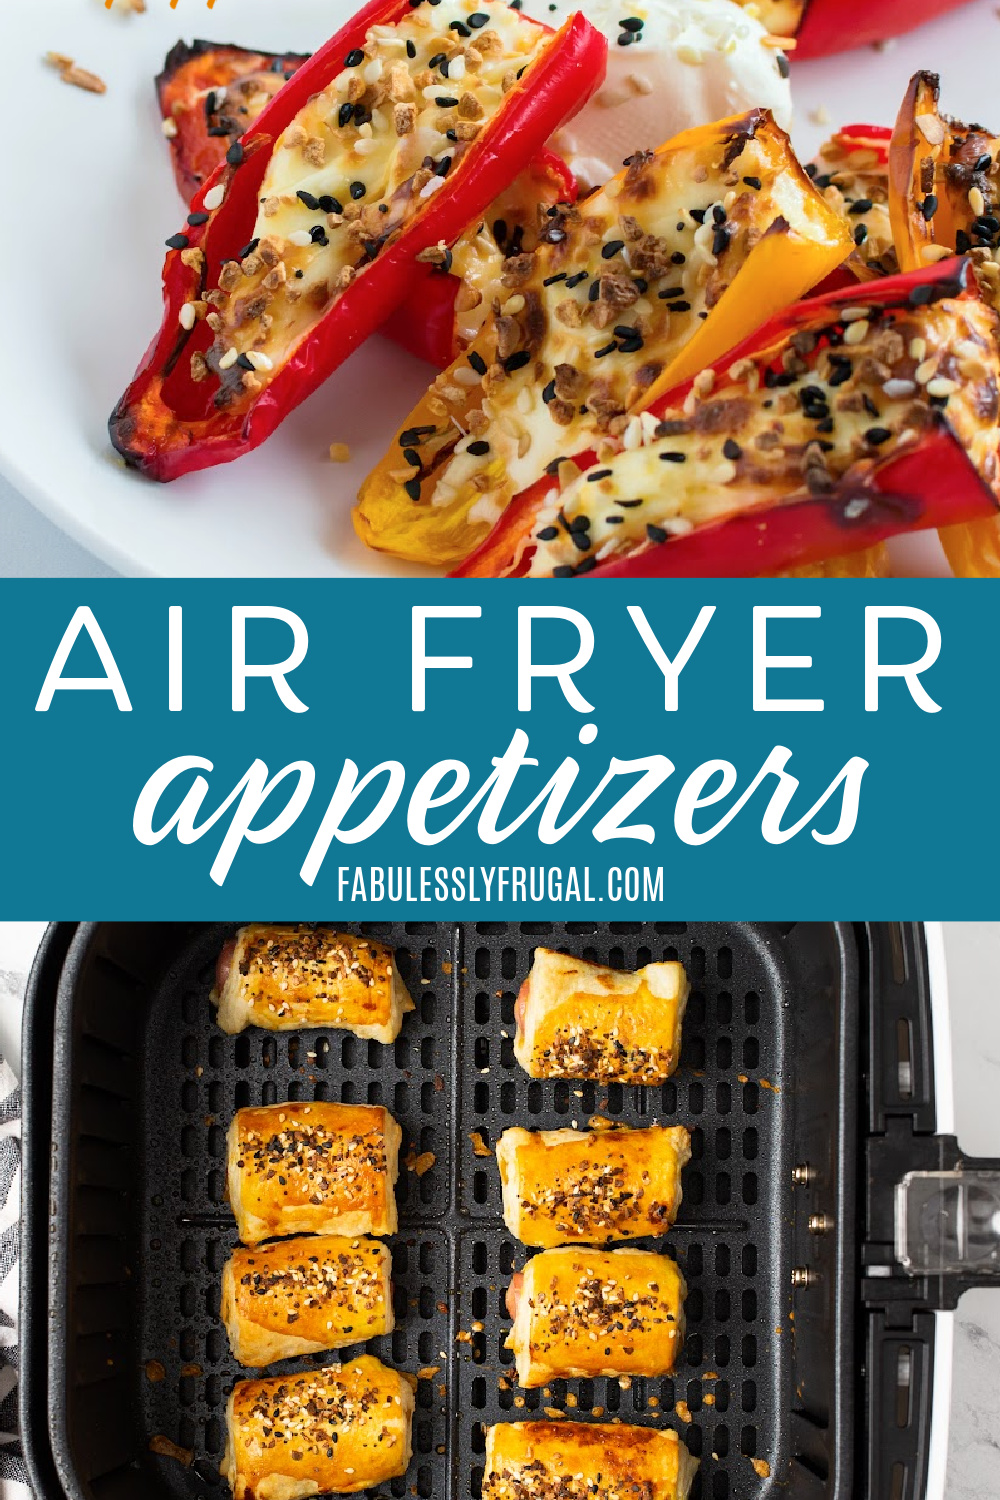 air fryer appetizers you don't want to miss